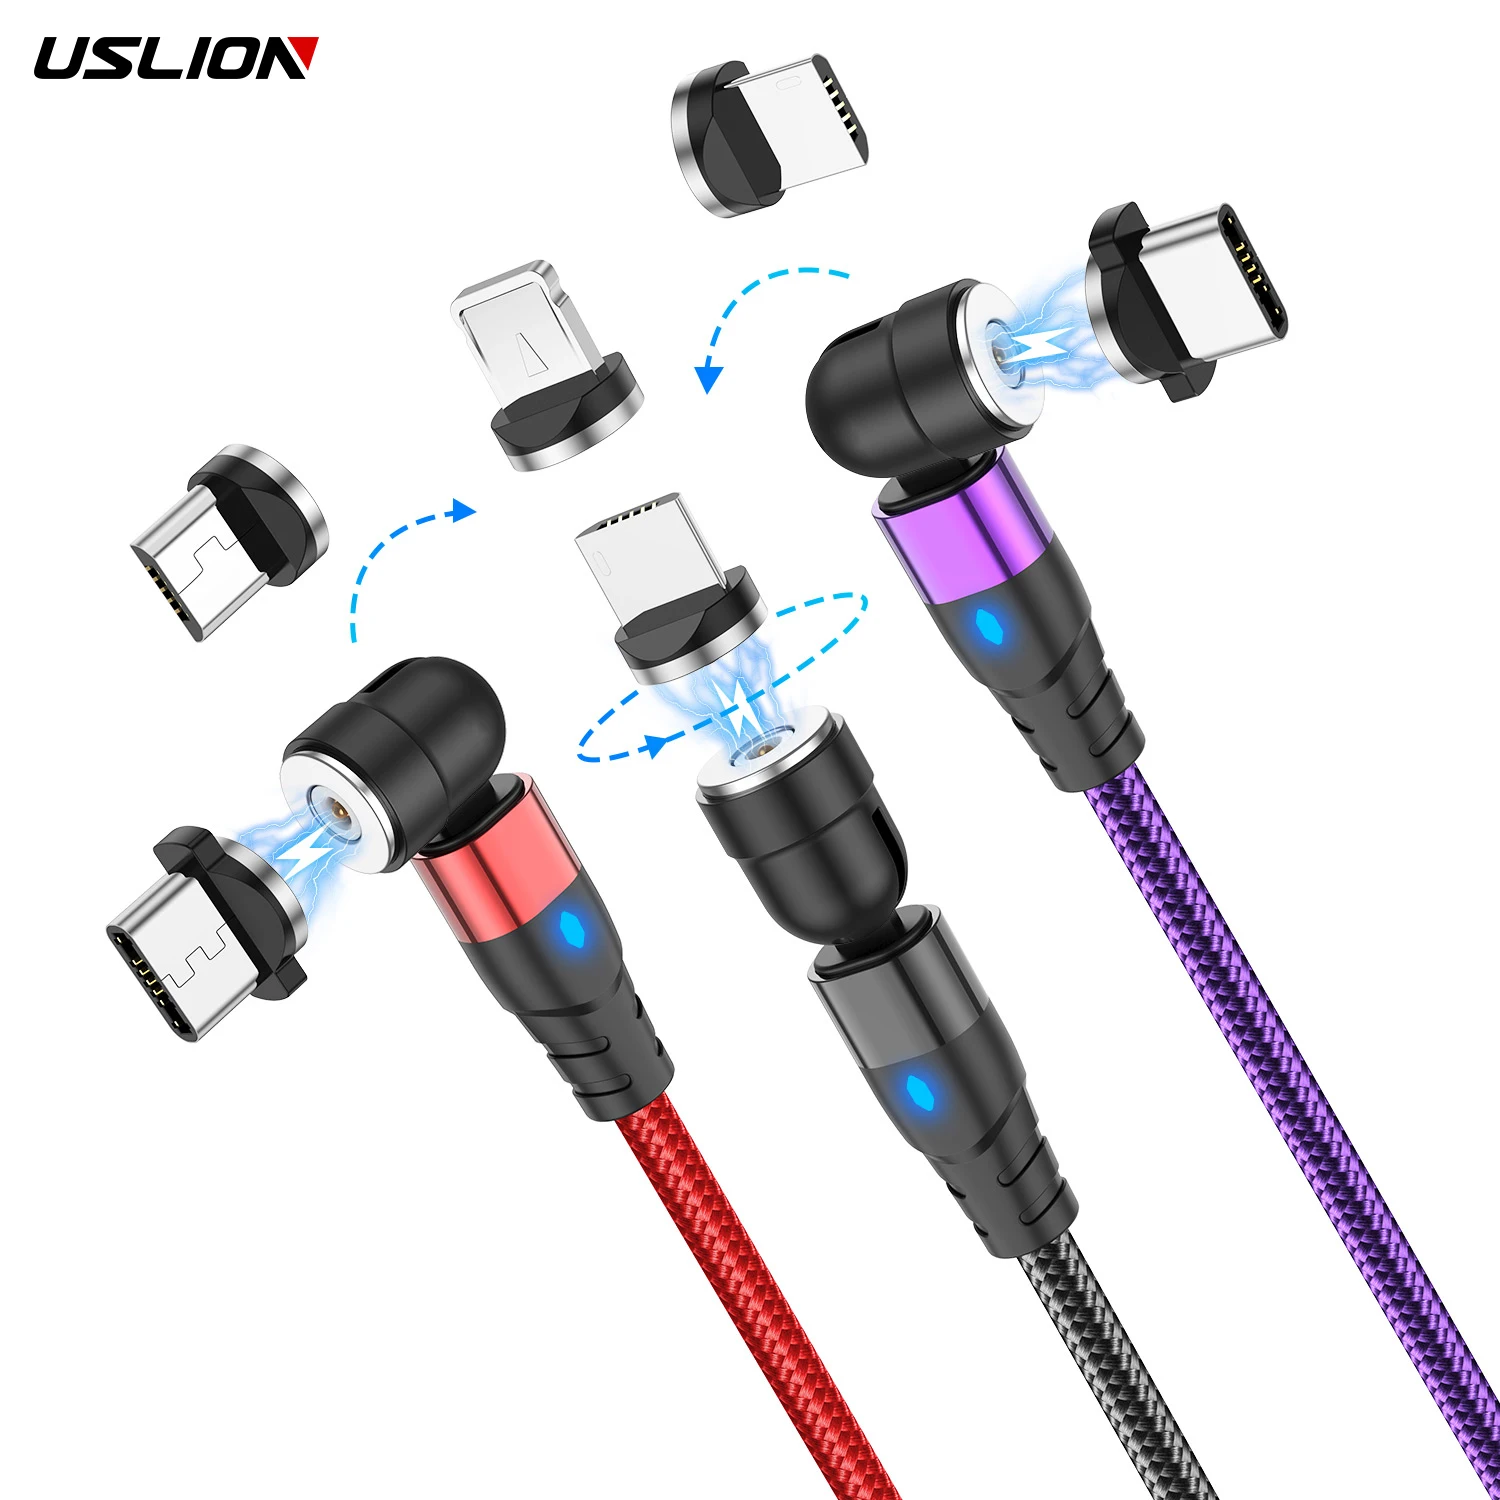 

USLION 1M 3.3FT Wholesale 3 in 1 USB Magnetic Fast Charging Cable 540 Degree free rotation micro usb cable, Black/red/silver/purple